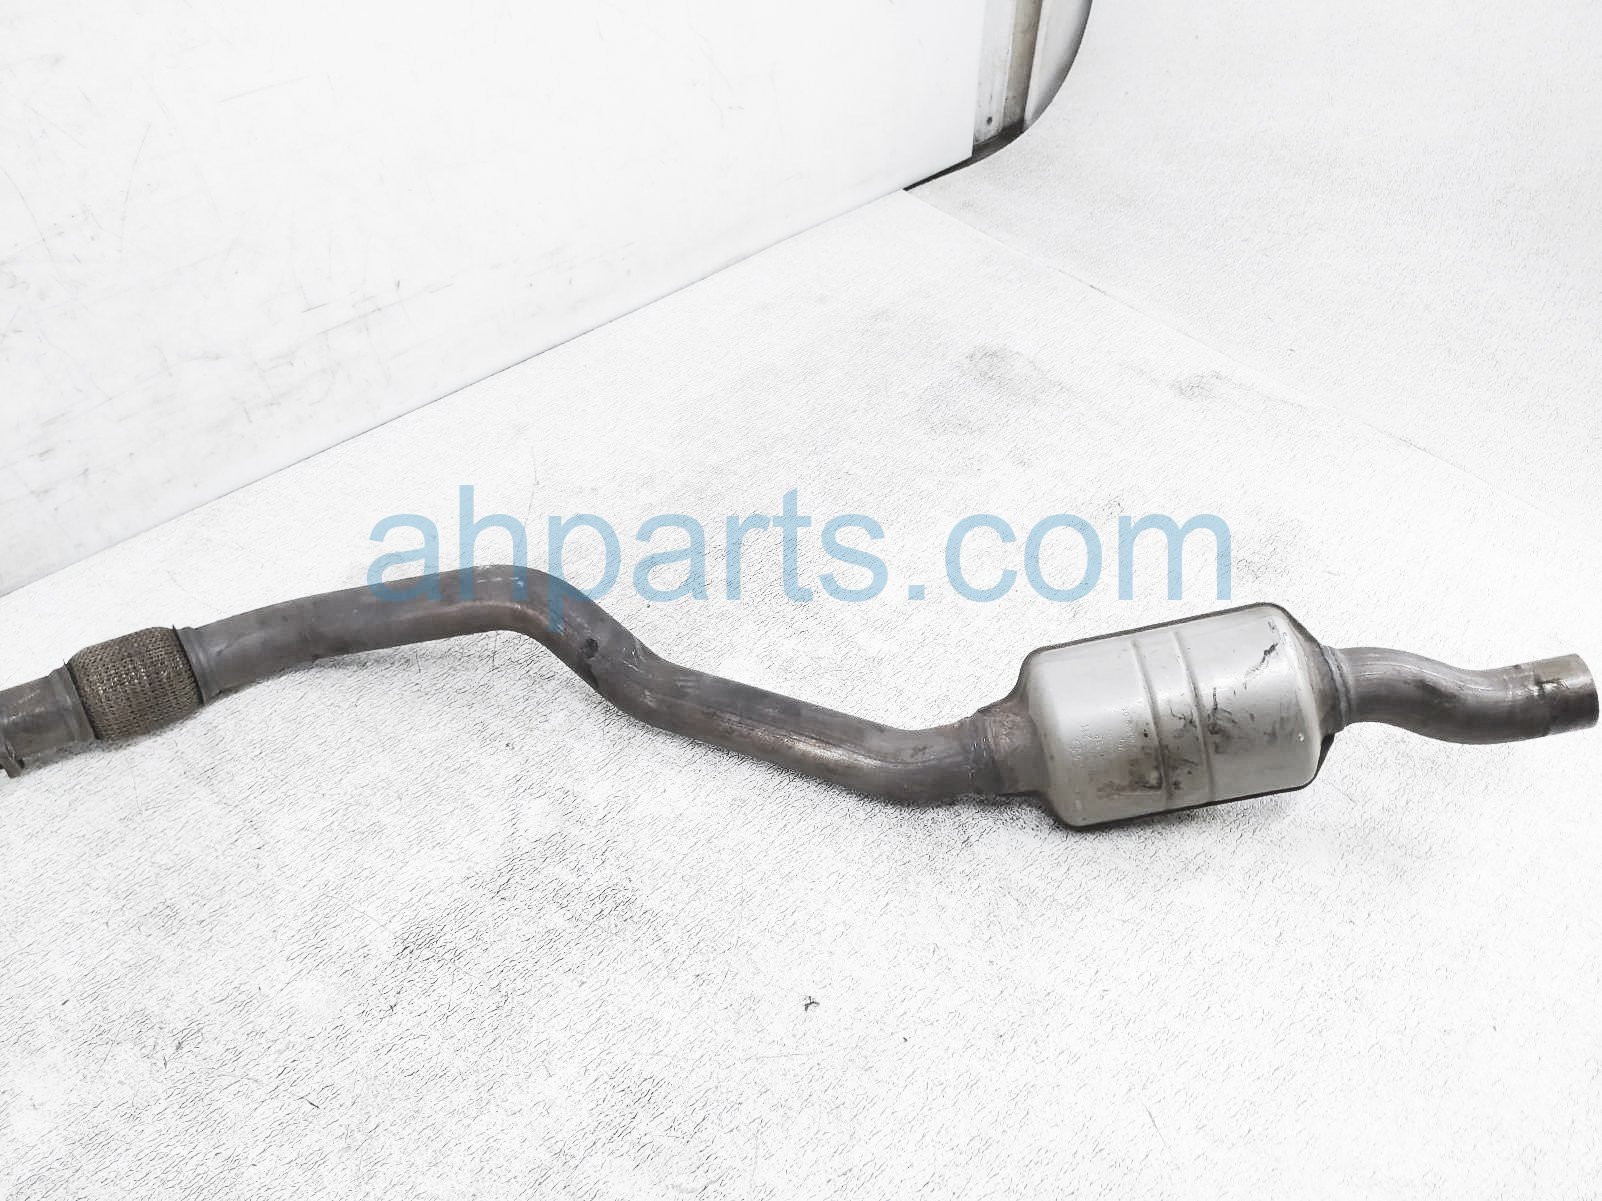 $299 Audi RH FRONT EXHAUST PIPE ASSY